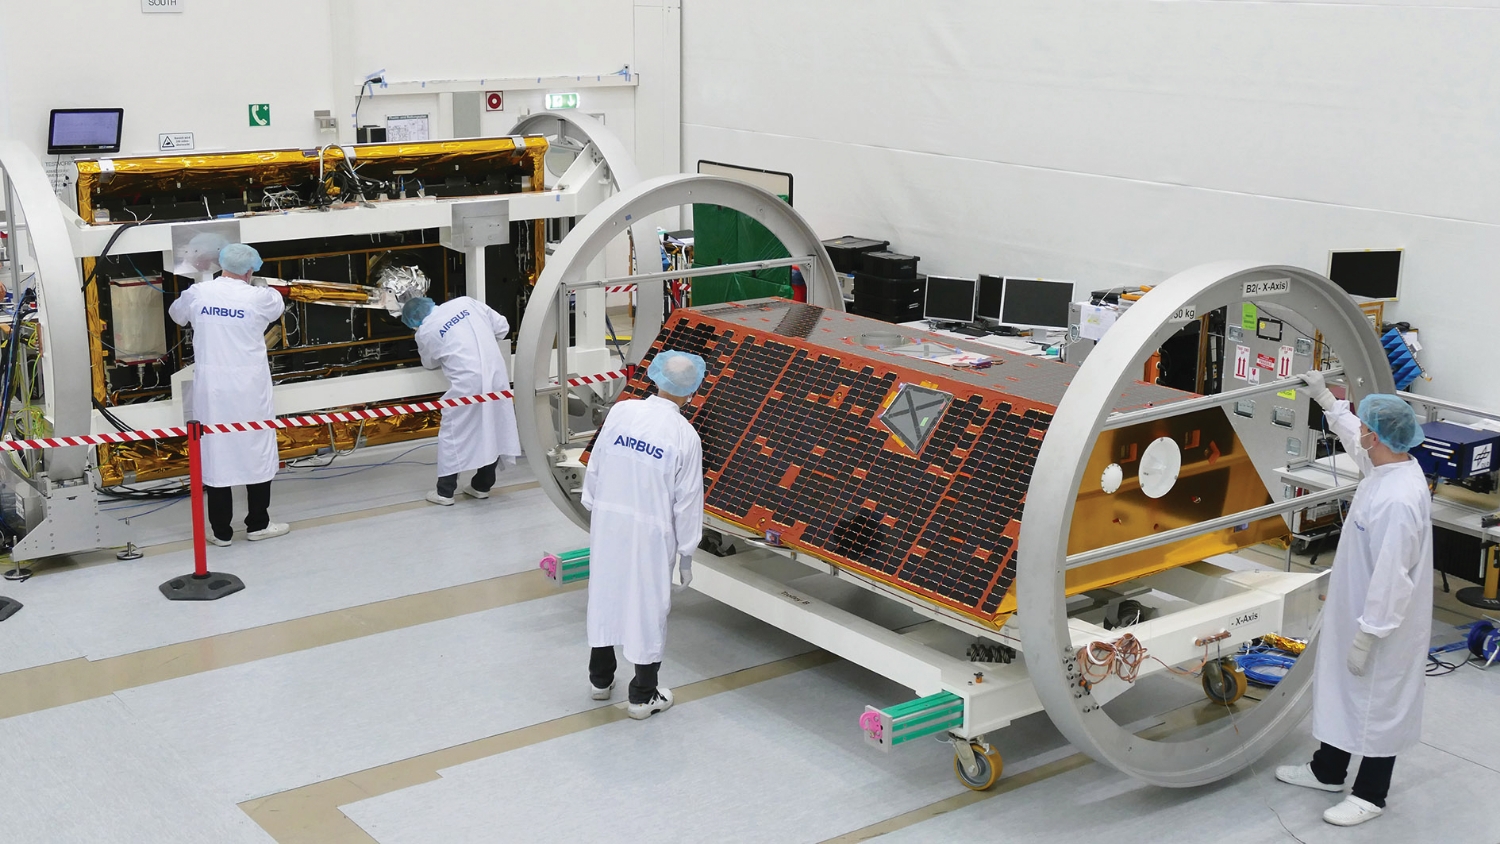 The GRACE-FO satellites were assembled by Airbus Defence and Space in Germany.